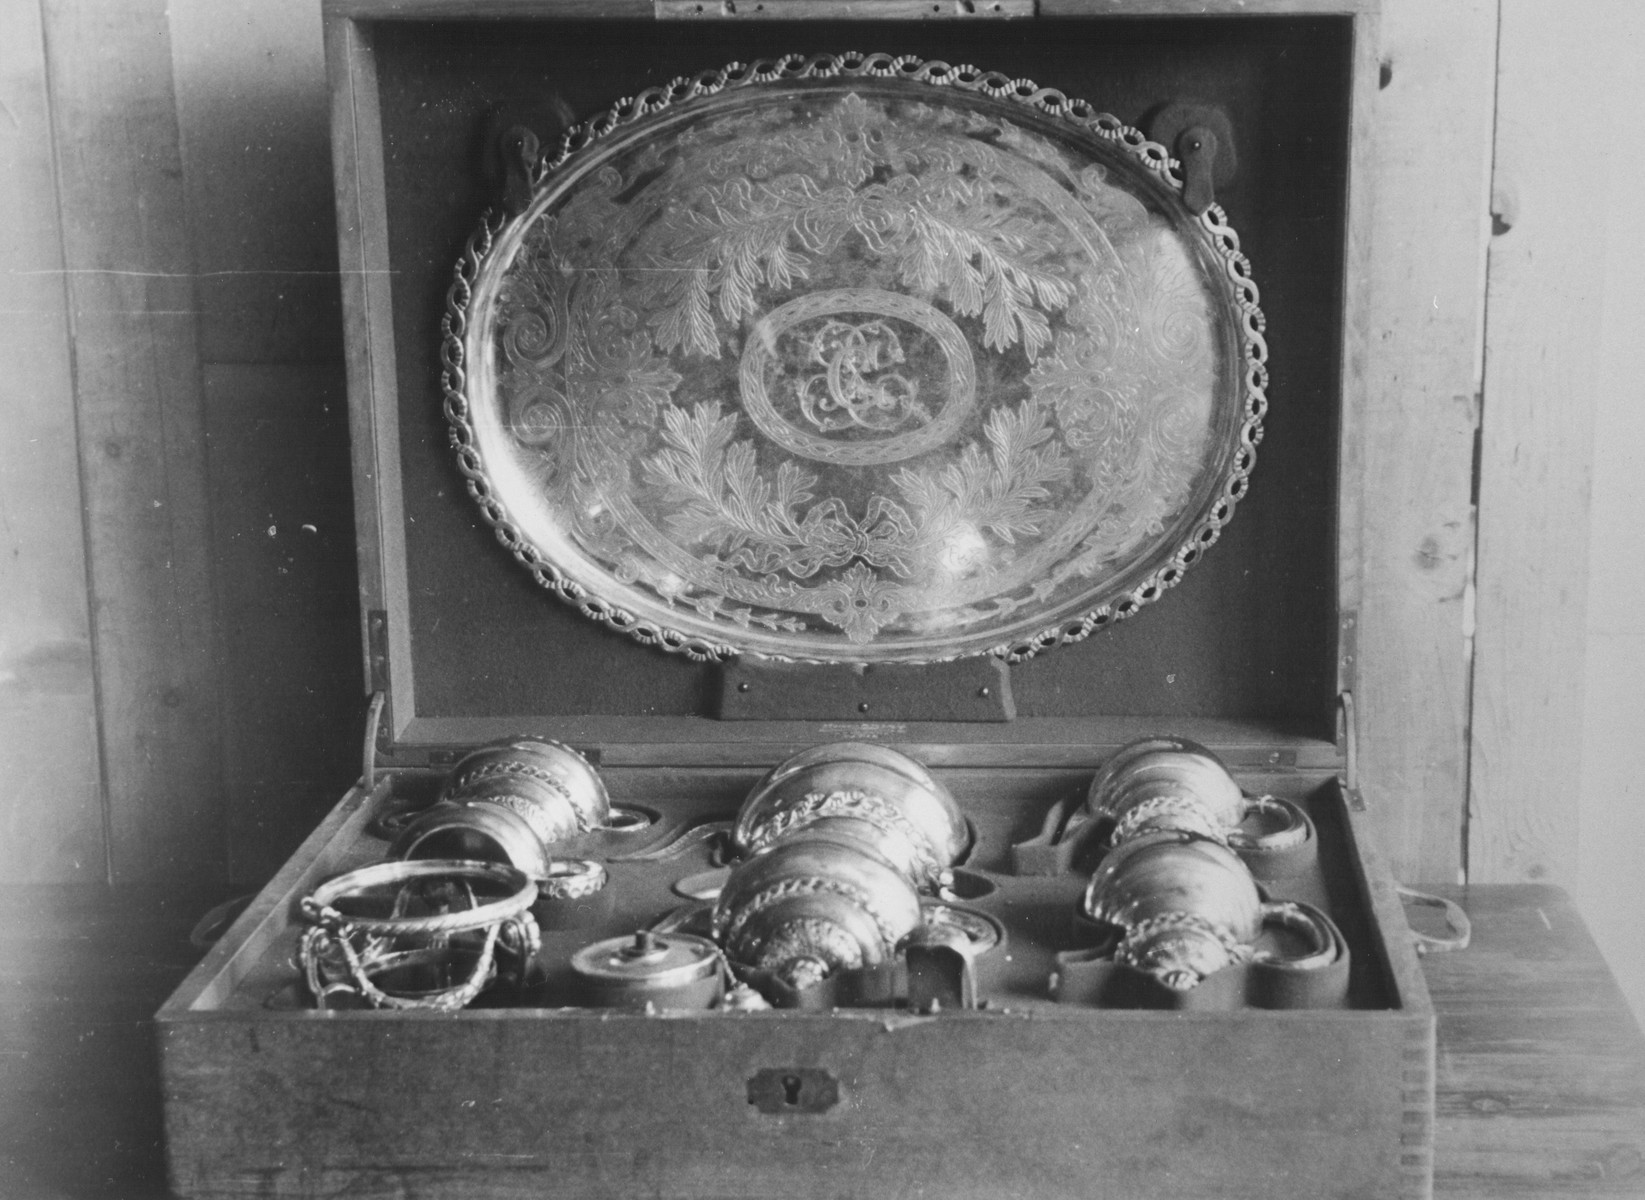 Display of a silver coffee set, confiscated from a Jewish household.